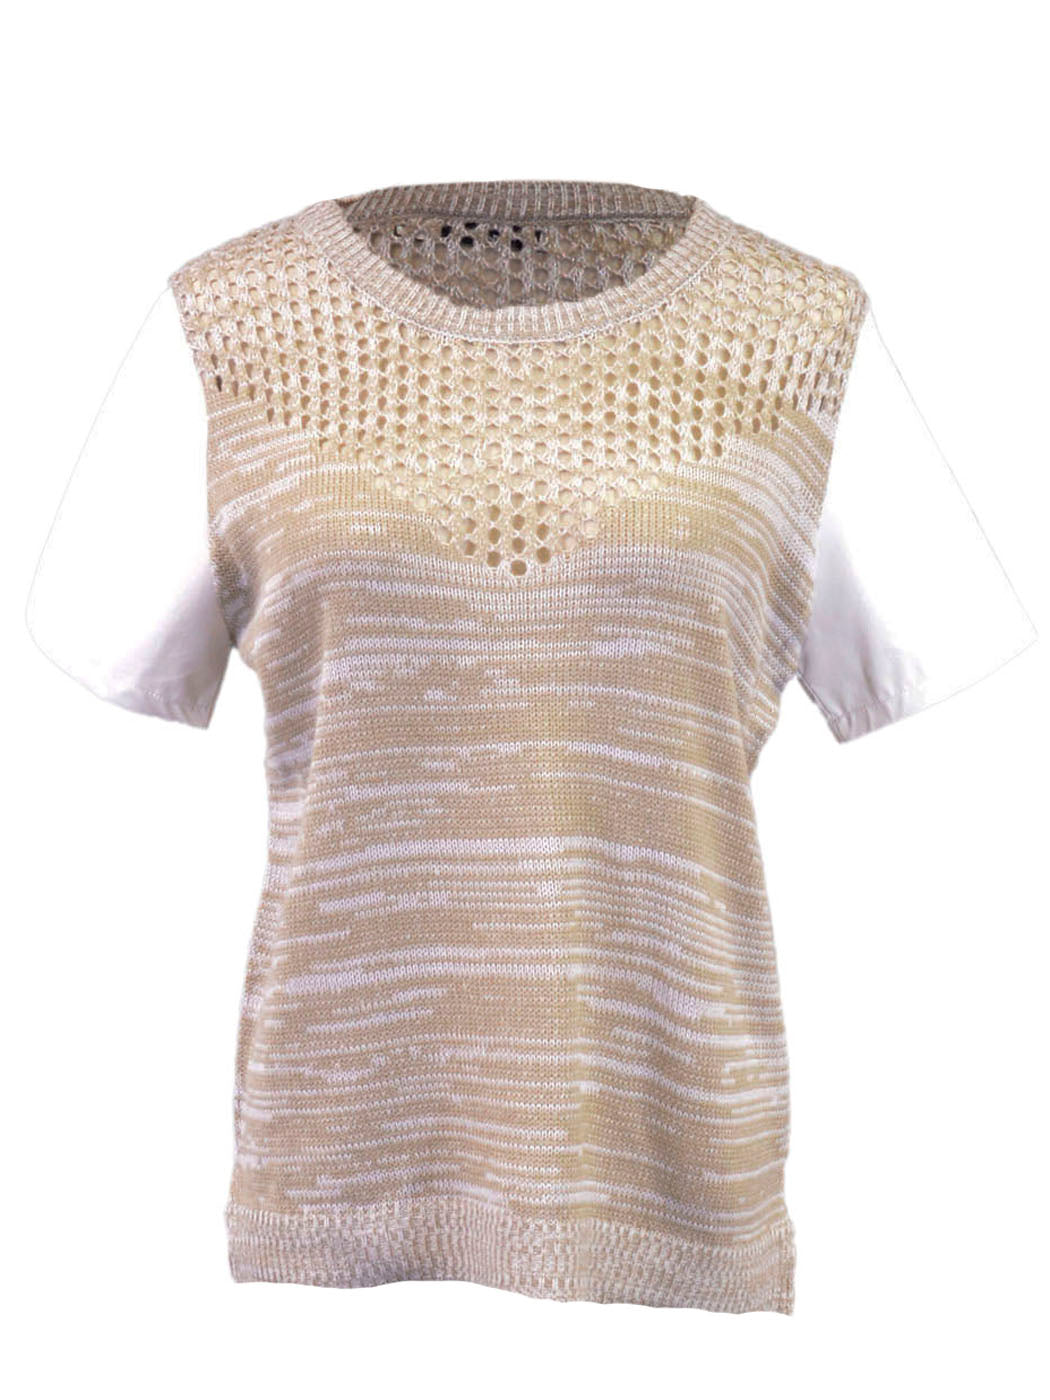 Lush Lightweight Short Sleeve Knit With Open Stitch Top Faux Leather Sleeves - ALILANG.COM